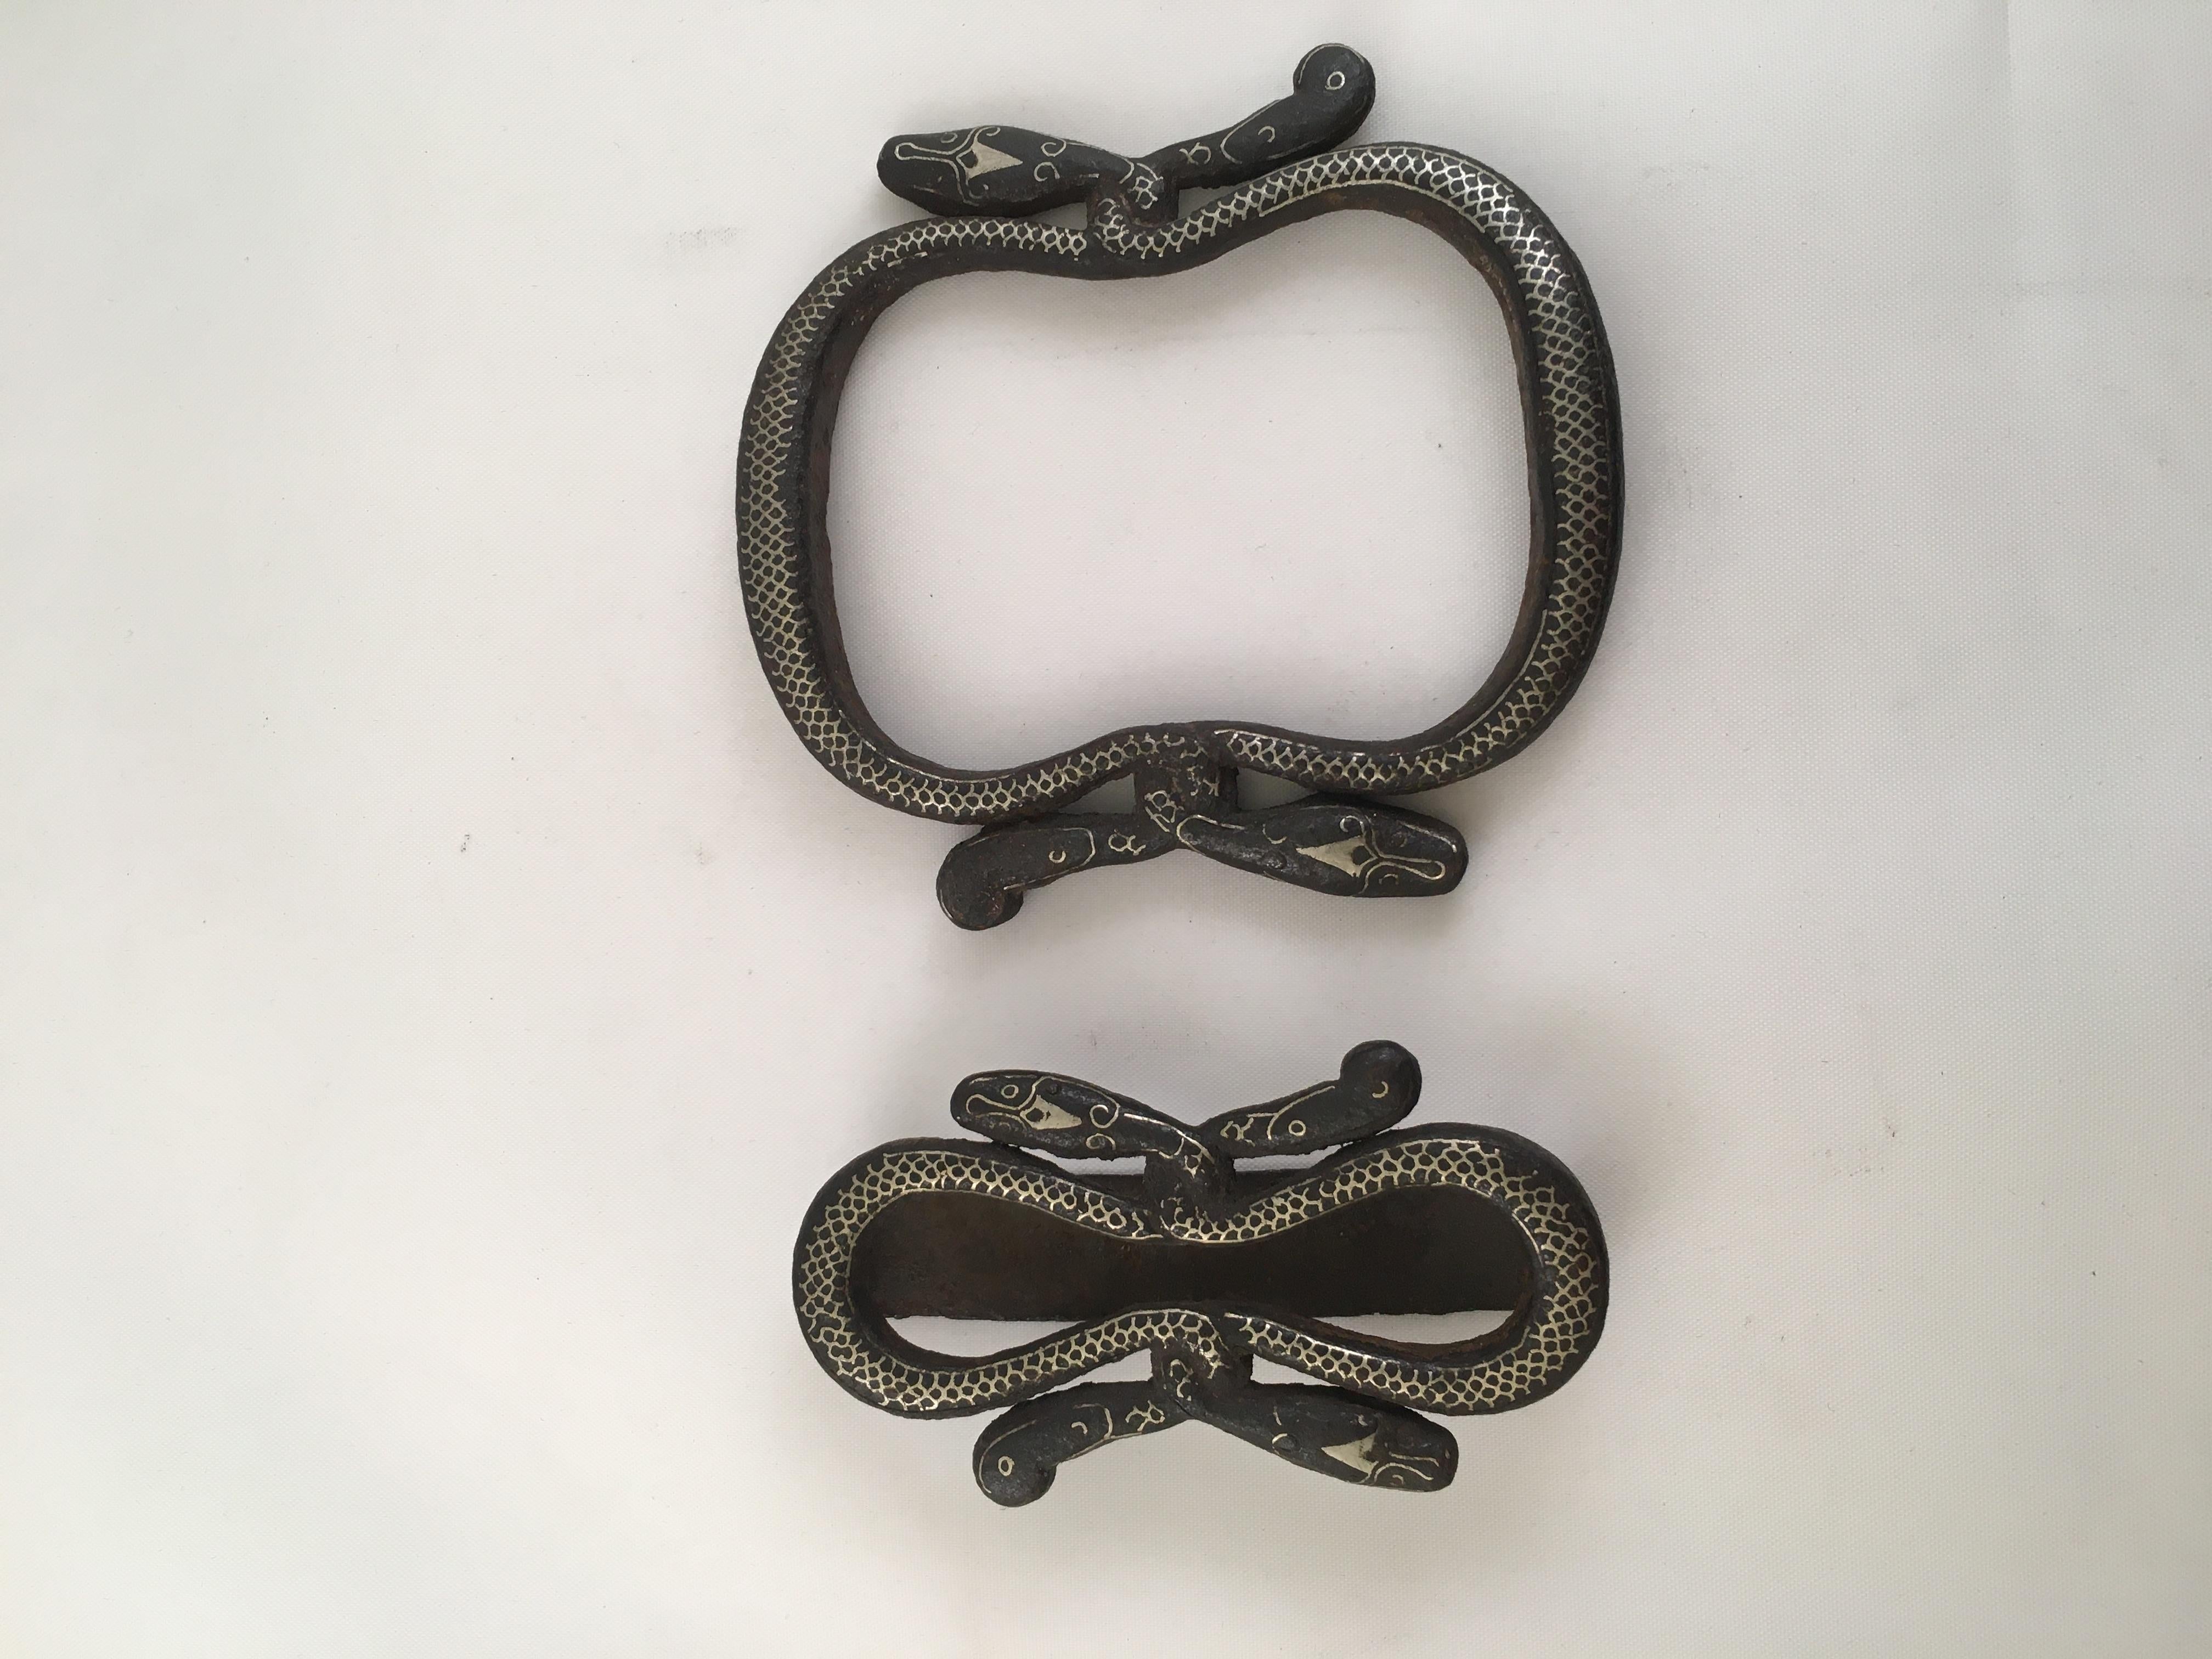 19th Century Java Surakarta Court Iron/Silver Inlay Snake Belt, Buckle and Slid For Sale 1